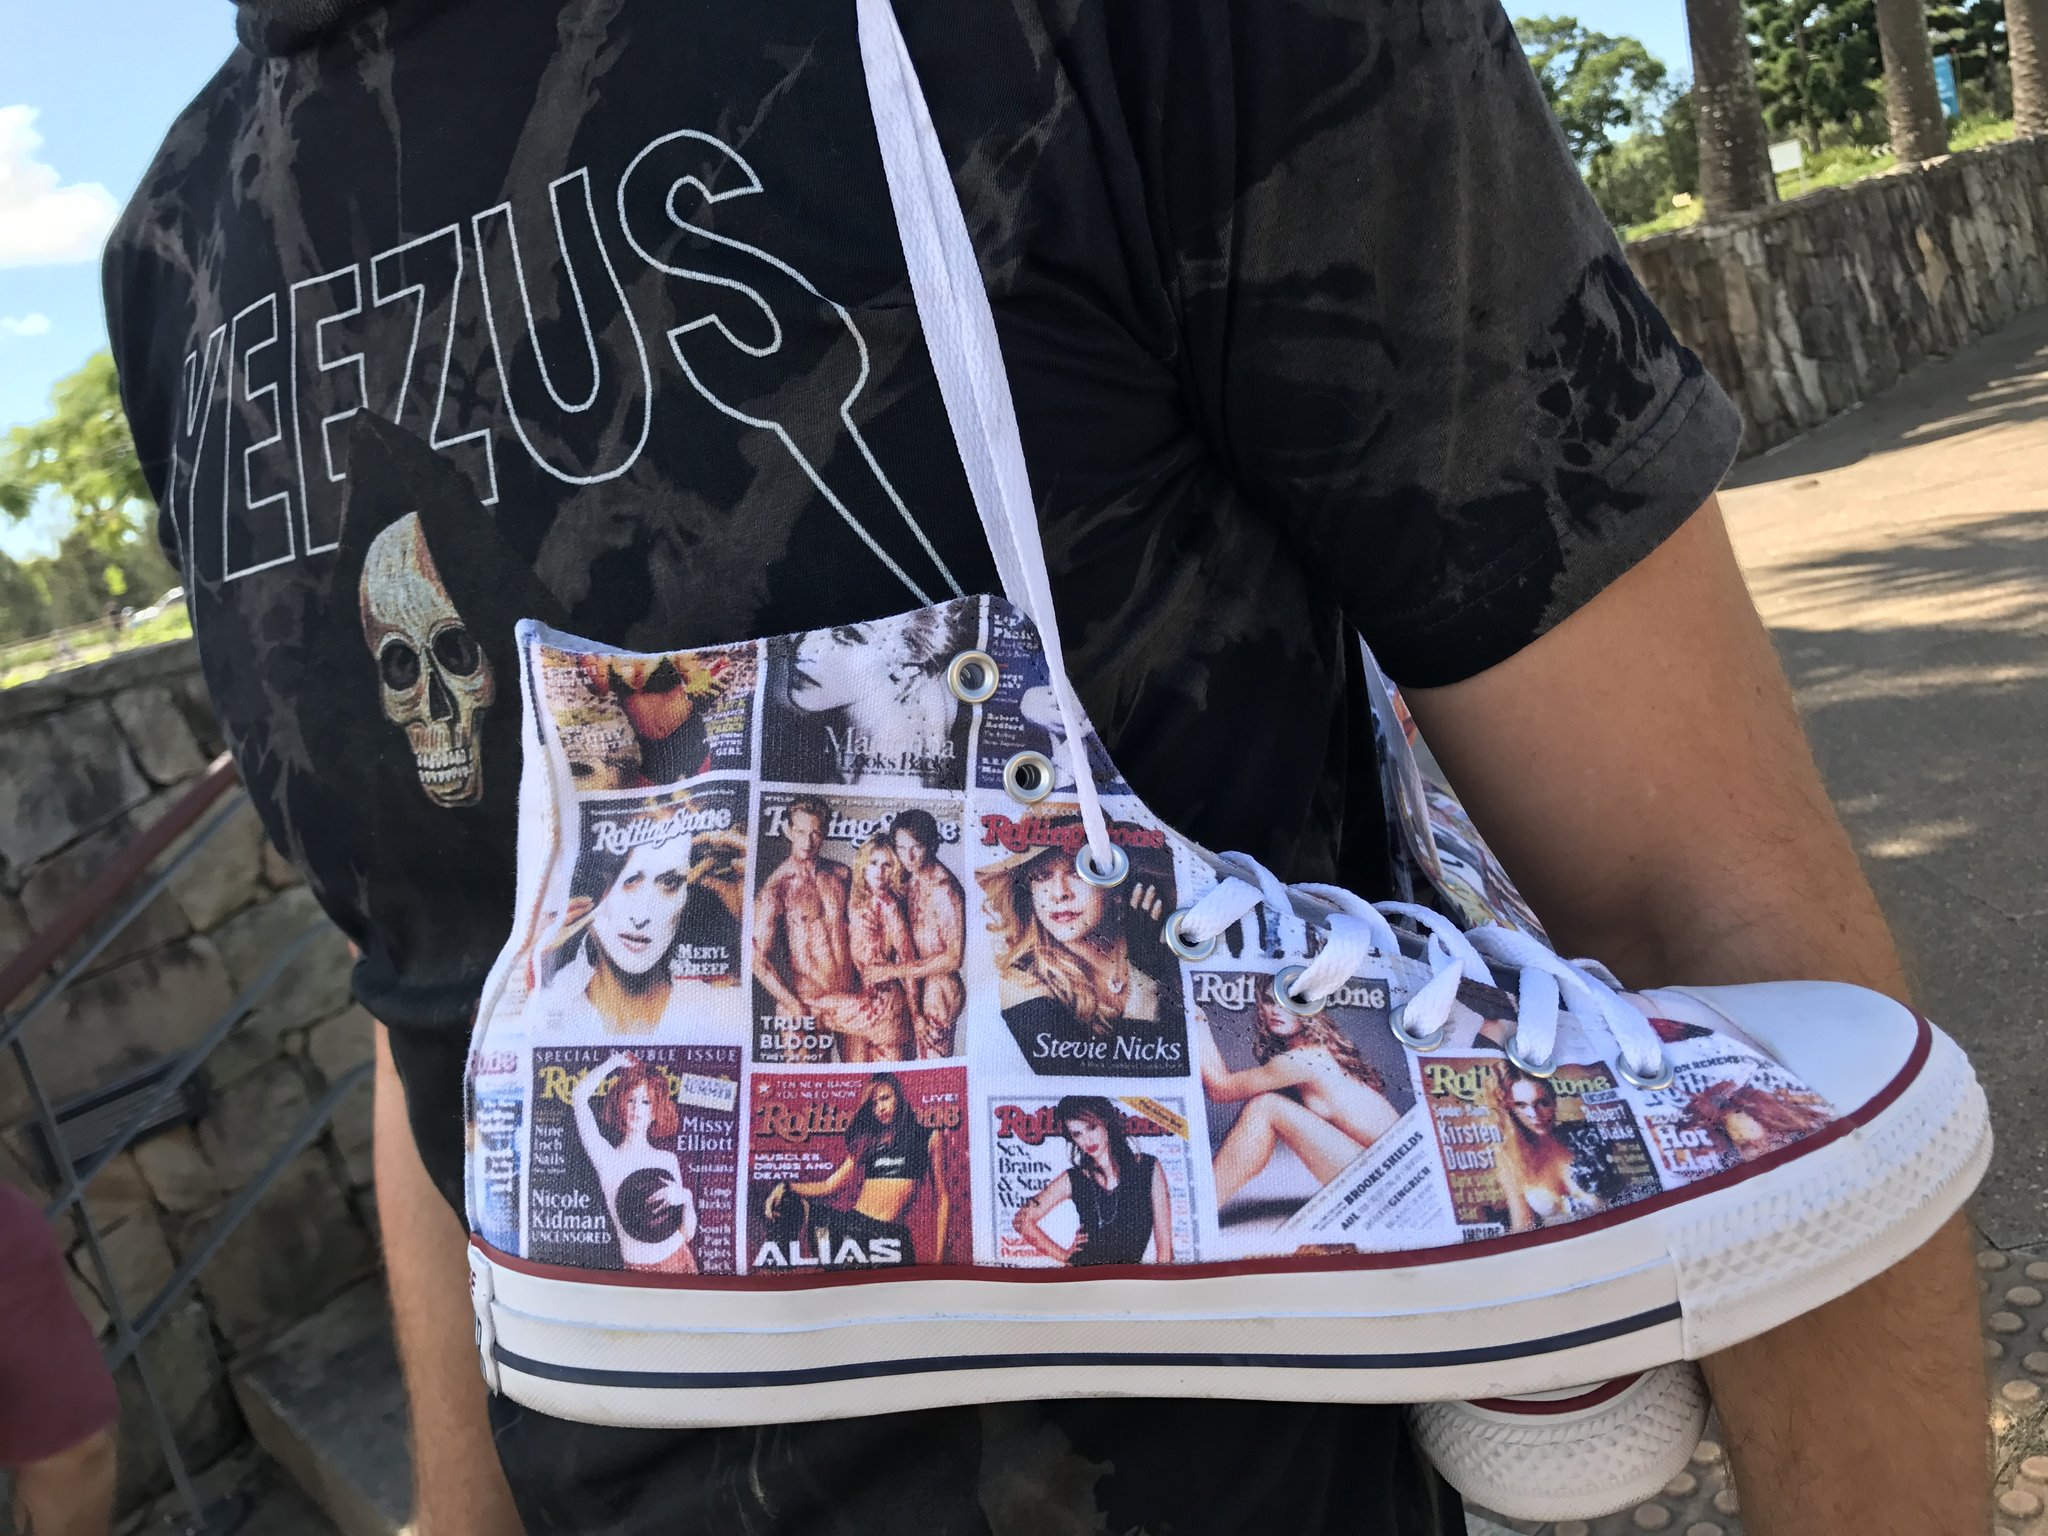 Bump Shoes on X: "Imma let you finish putting on those sweet rolling stones  custom chucks #customshoes #createyourown #converse #yeezy #rollingstones  https://t.co/fE7inVCIYk" / X